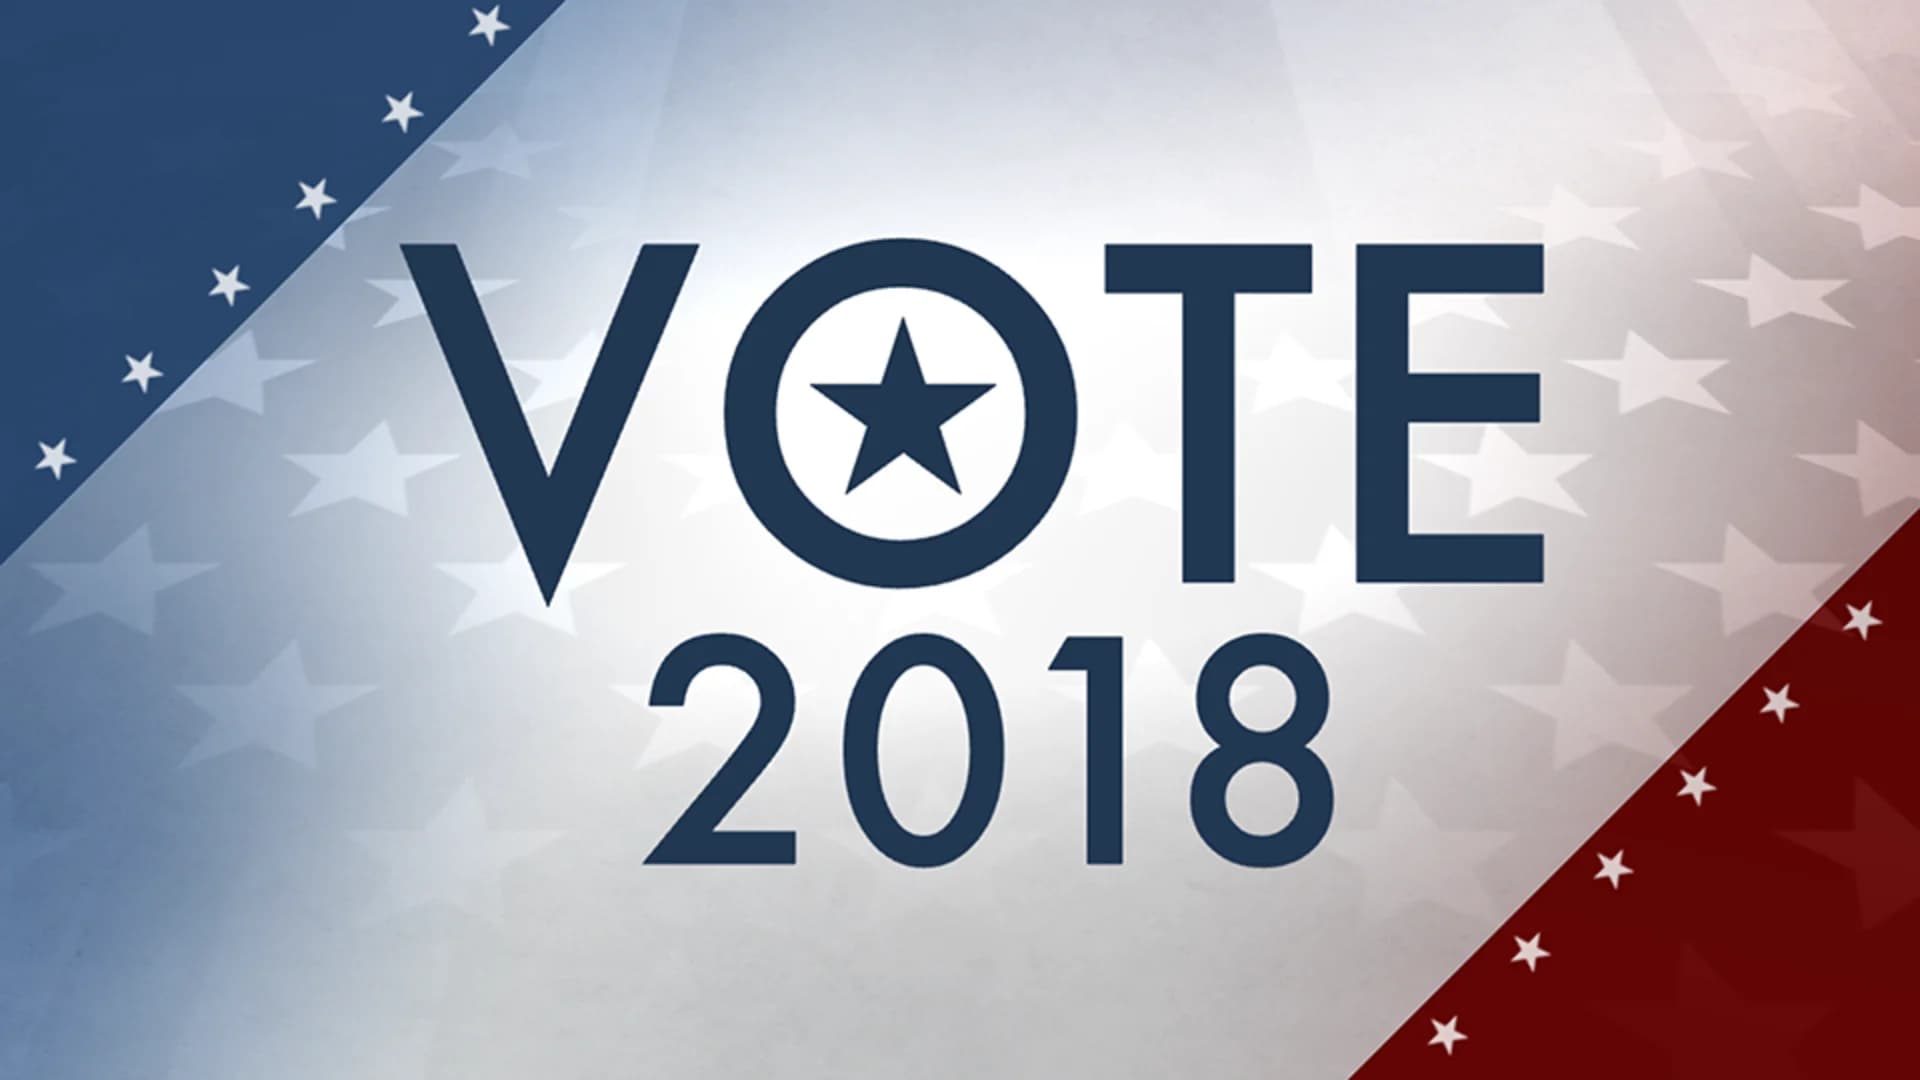 Hudson Valley Vote 2018: Complete Election Results